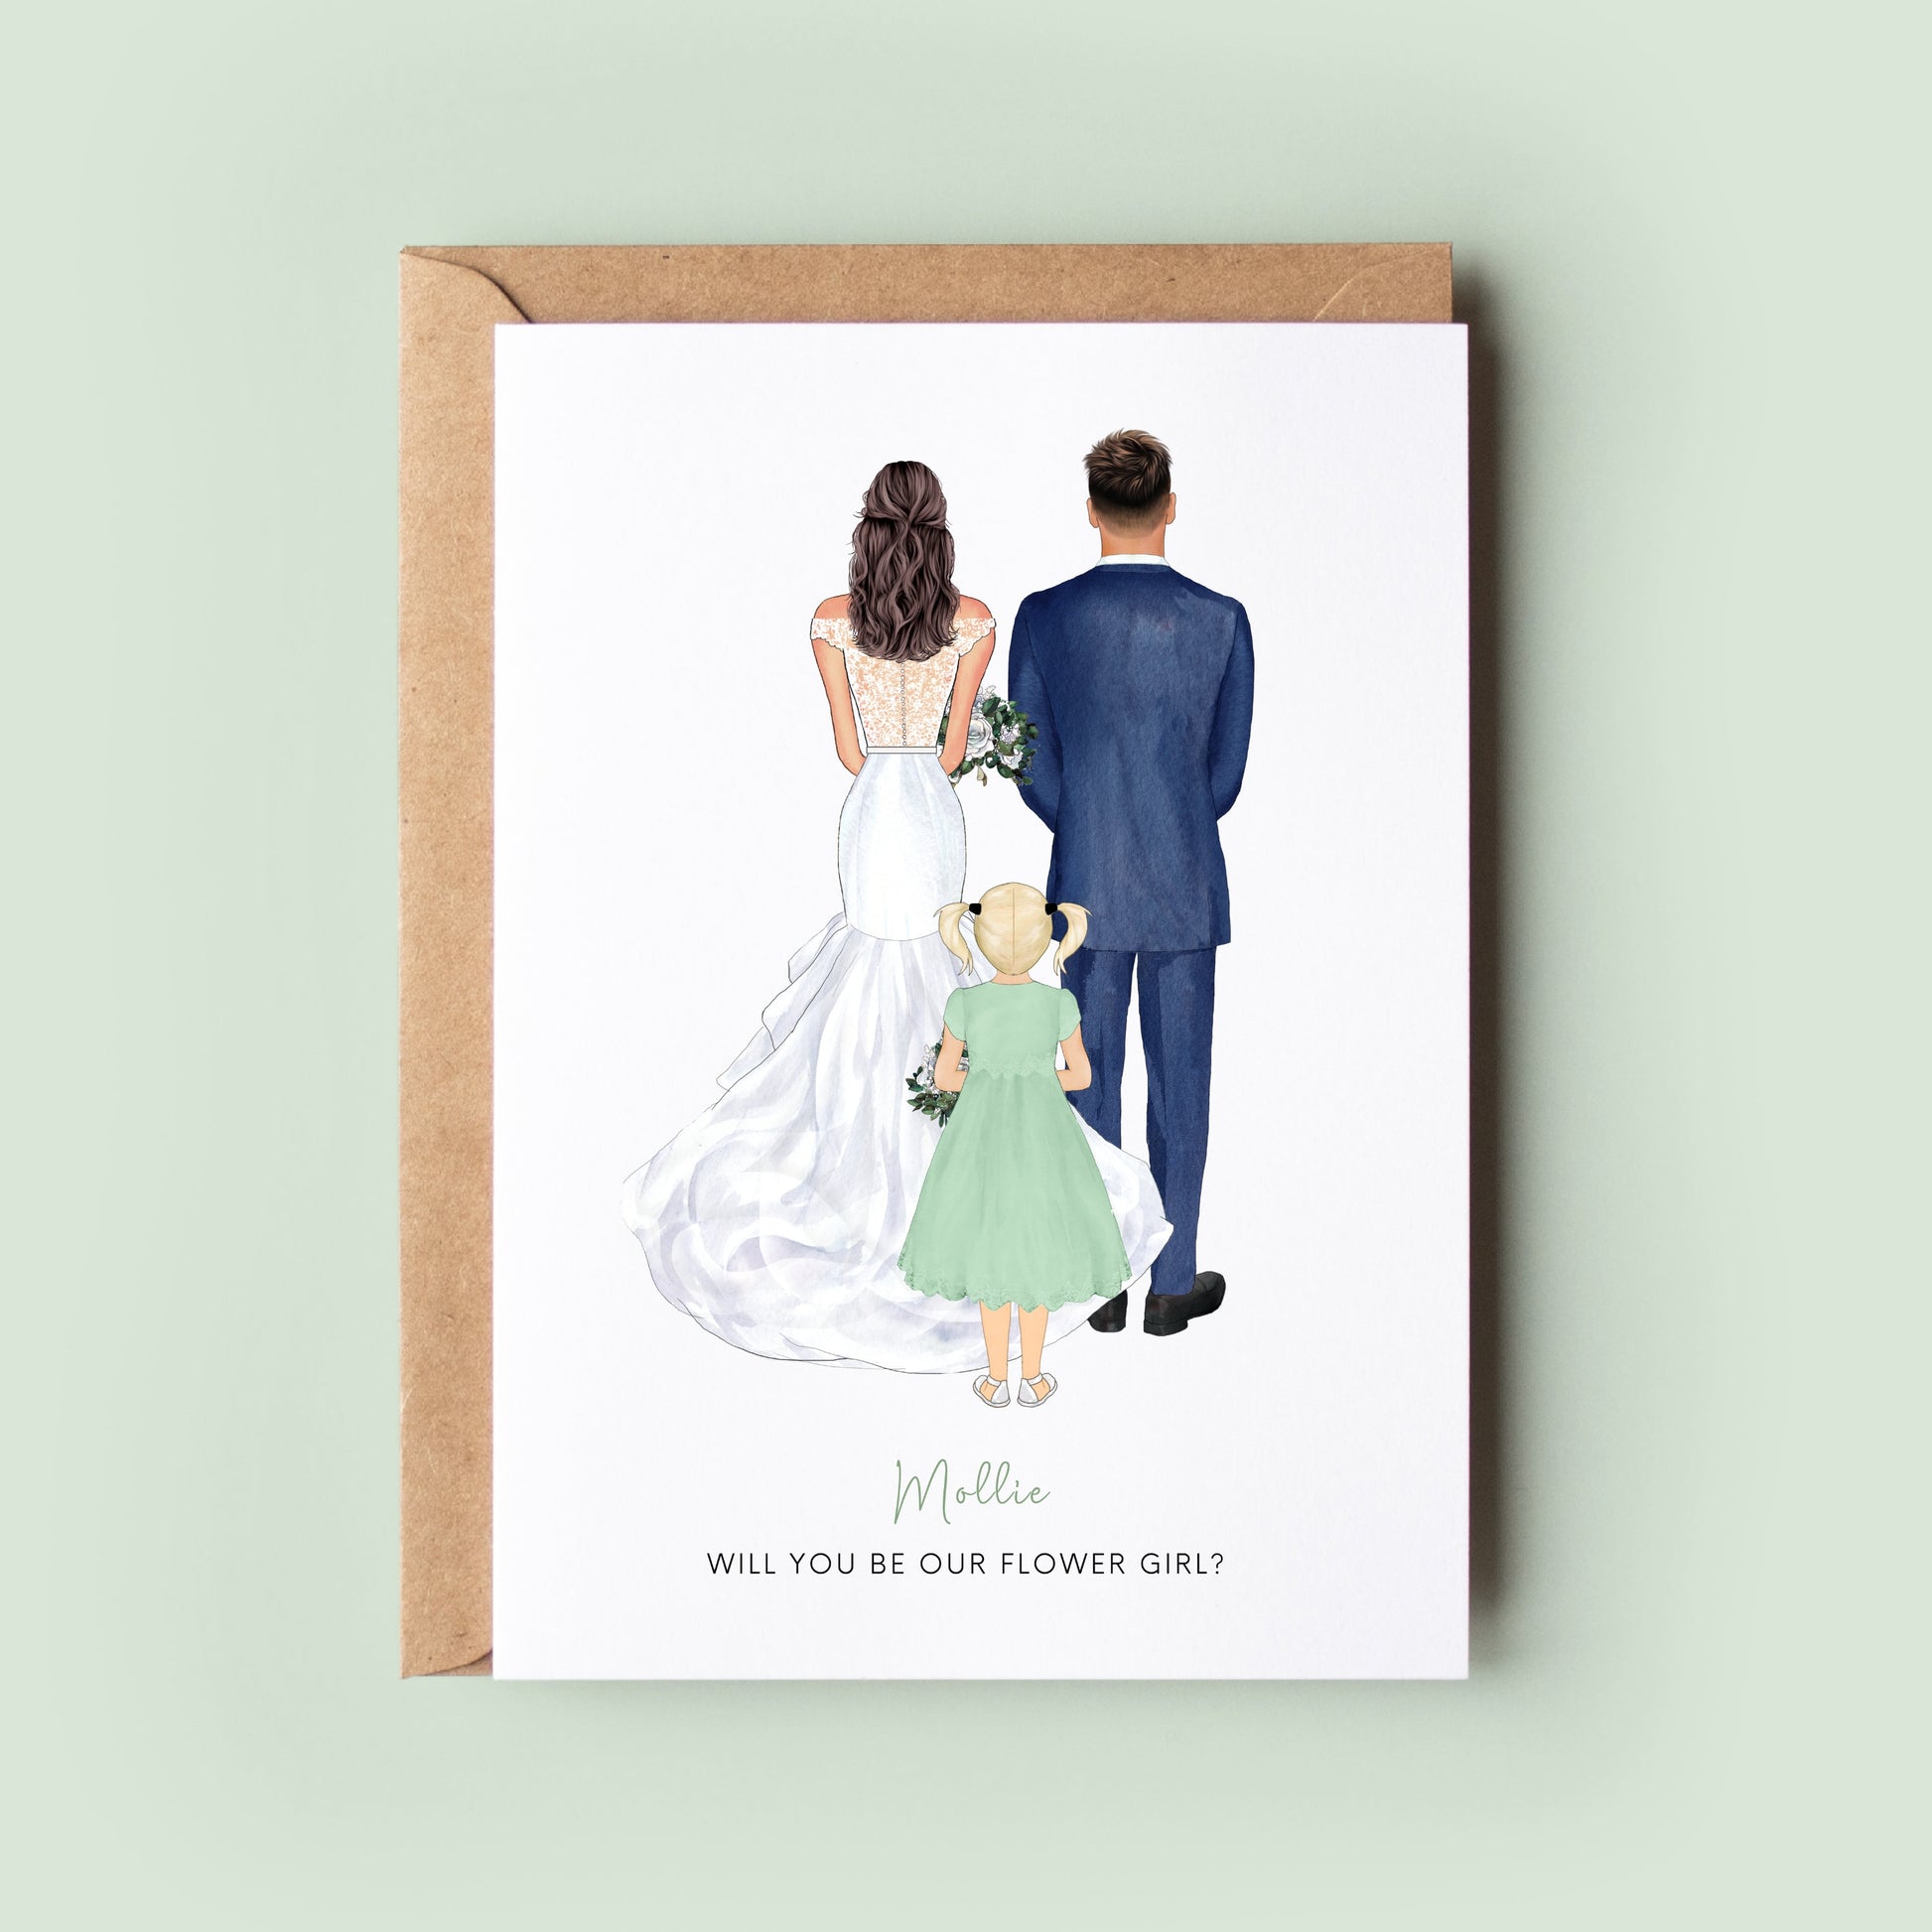 A personalised flower girl proposal card featuring custom illustrations and a space for a personal message from the bride and groom.